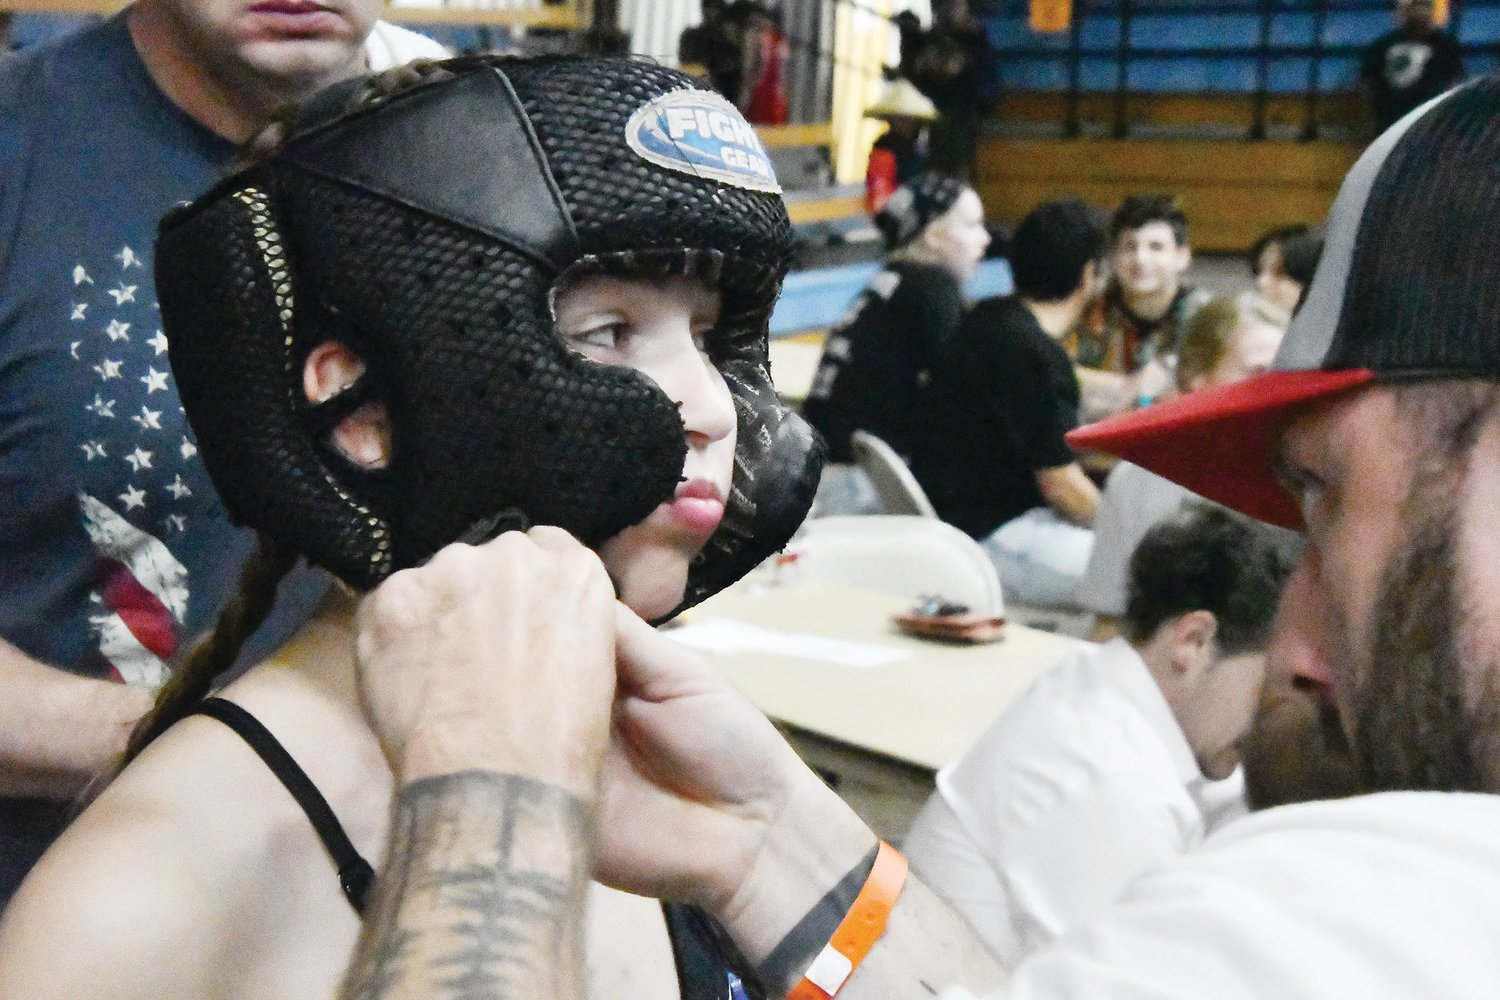 Fight promoter Ricky Davidson adjusts Addison Orscheln's headgear before her kickboxing exhibition versus Aryanna Kimball. Orscheln is a 16-year-old Moberly High School student.